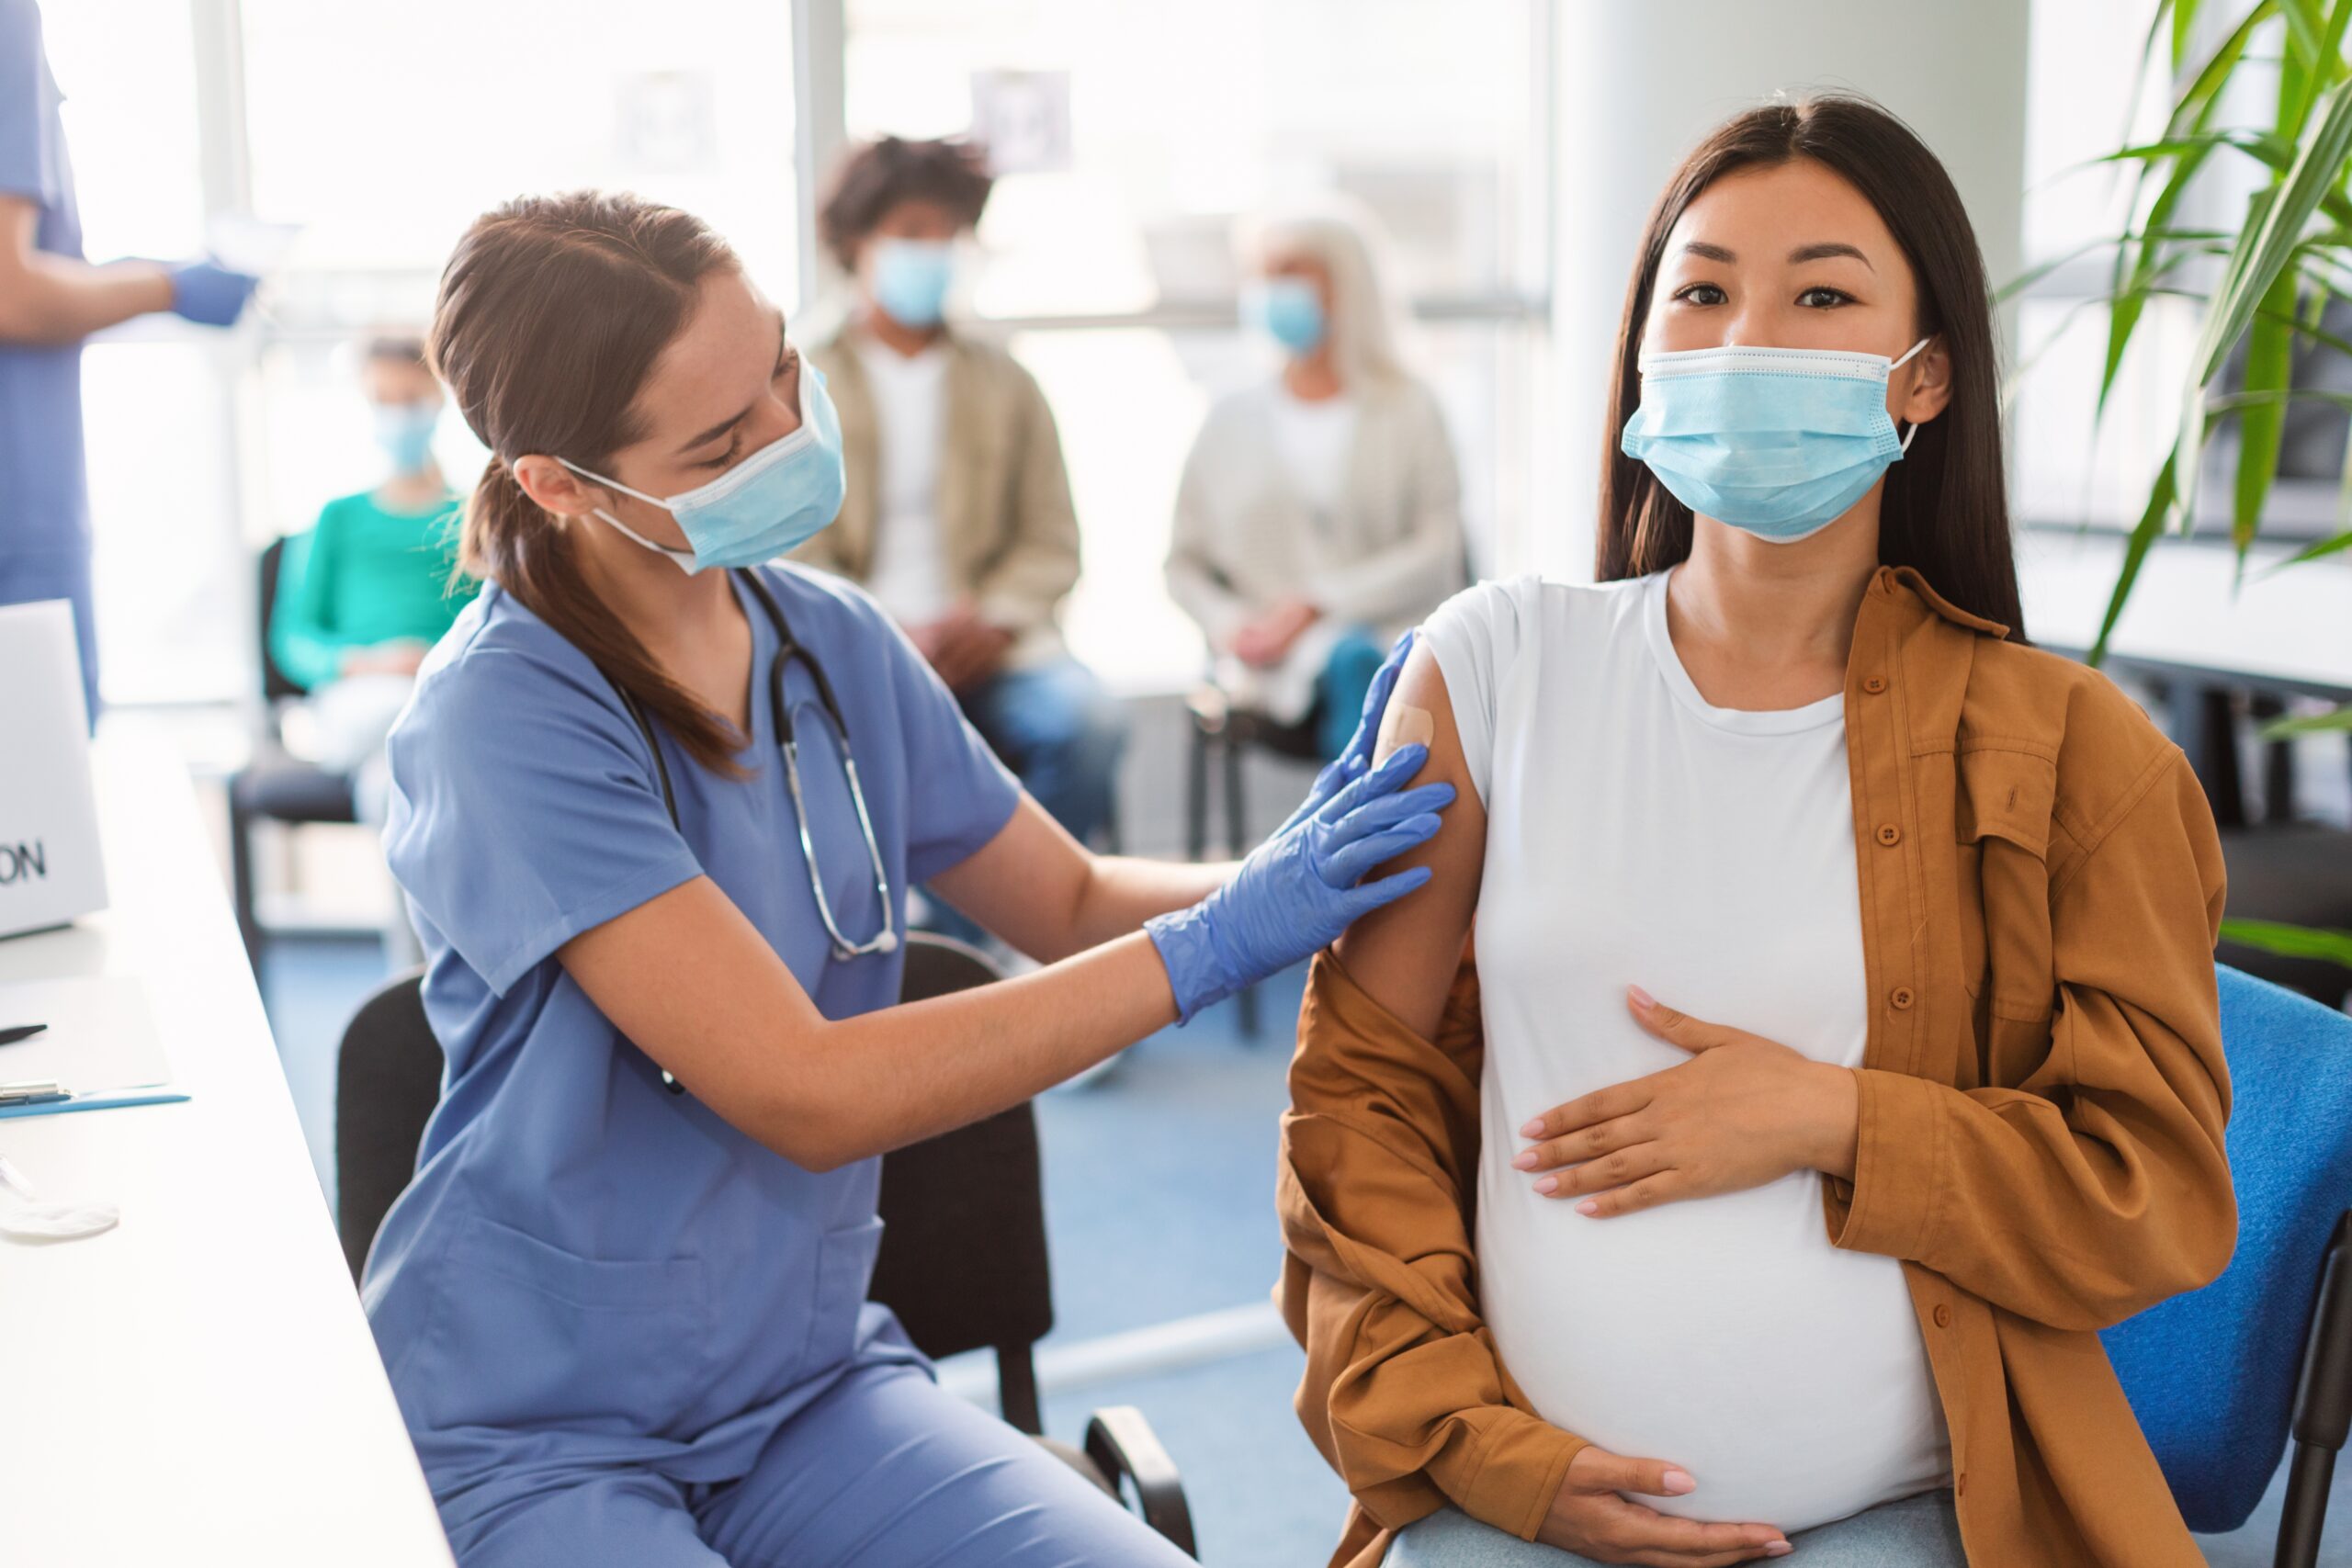 Asian pregnant woman wearing a mask is getting a bandage placed on her arm by a white female nurse in blue scrubs and a mask.